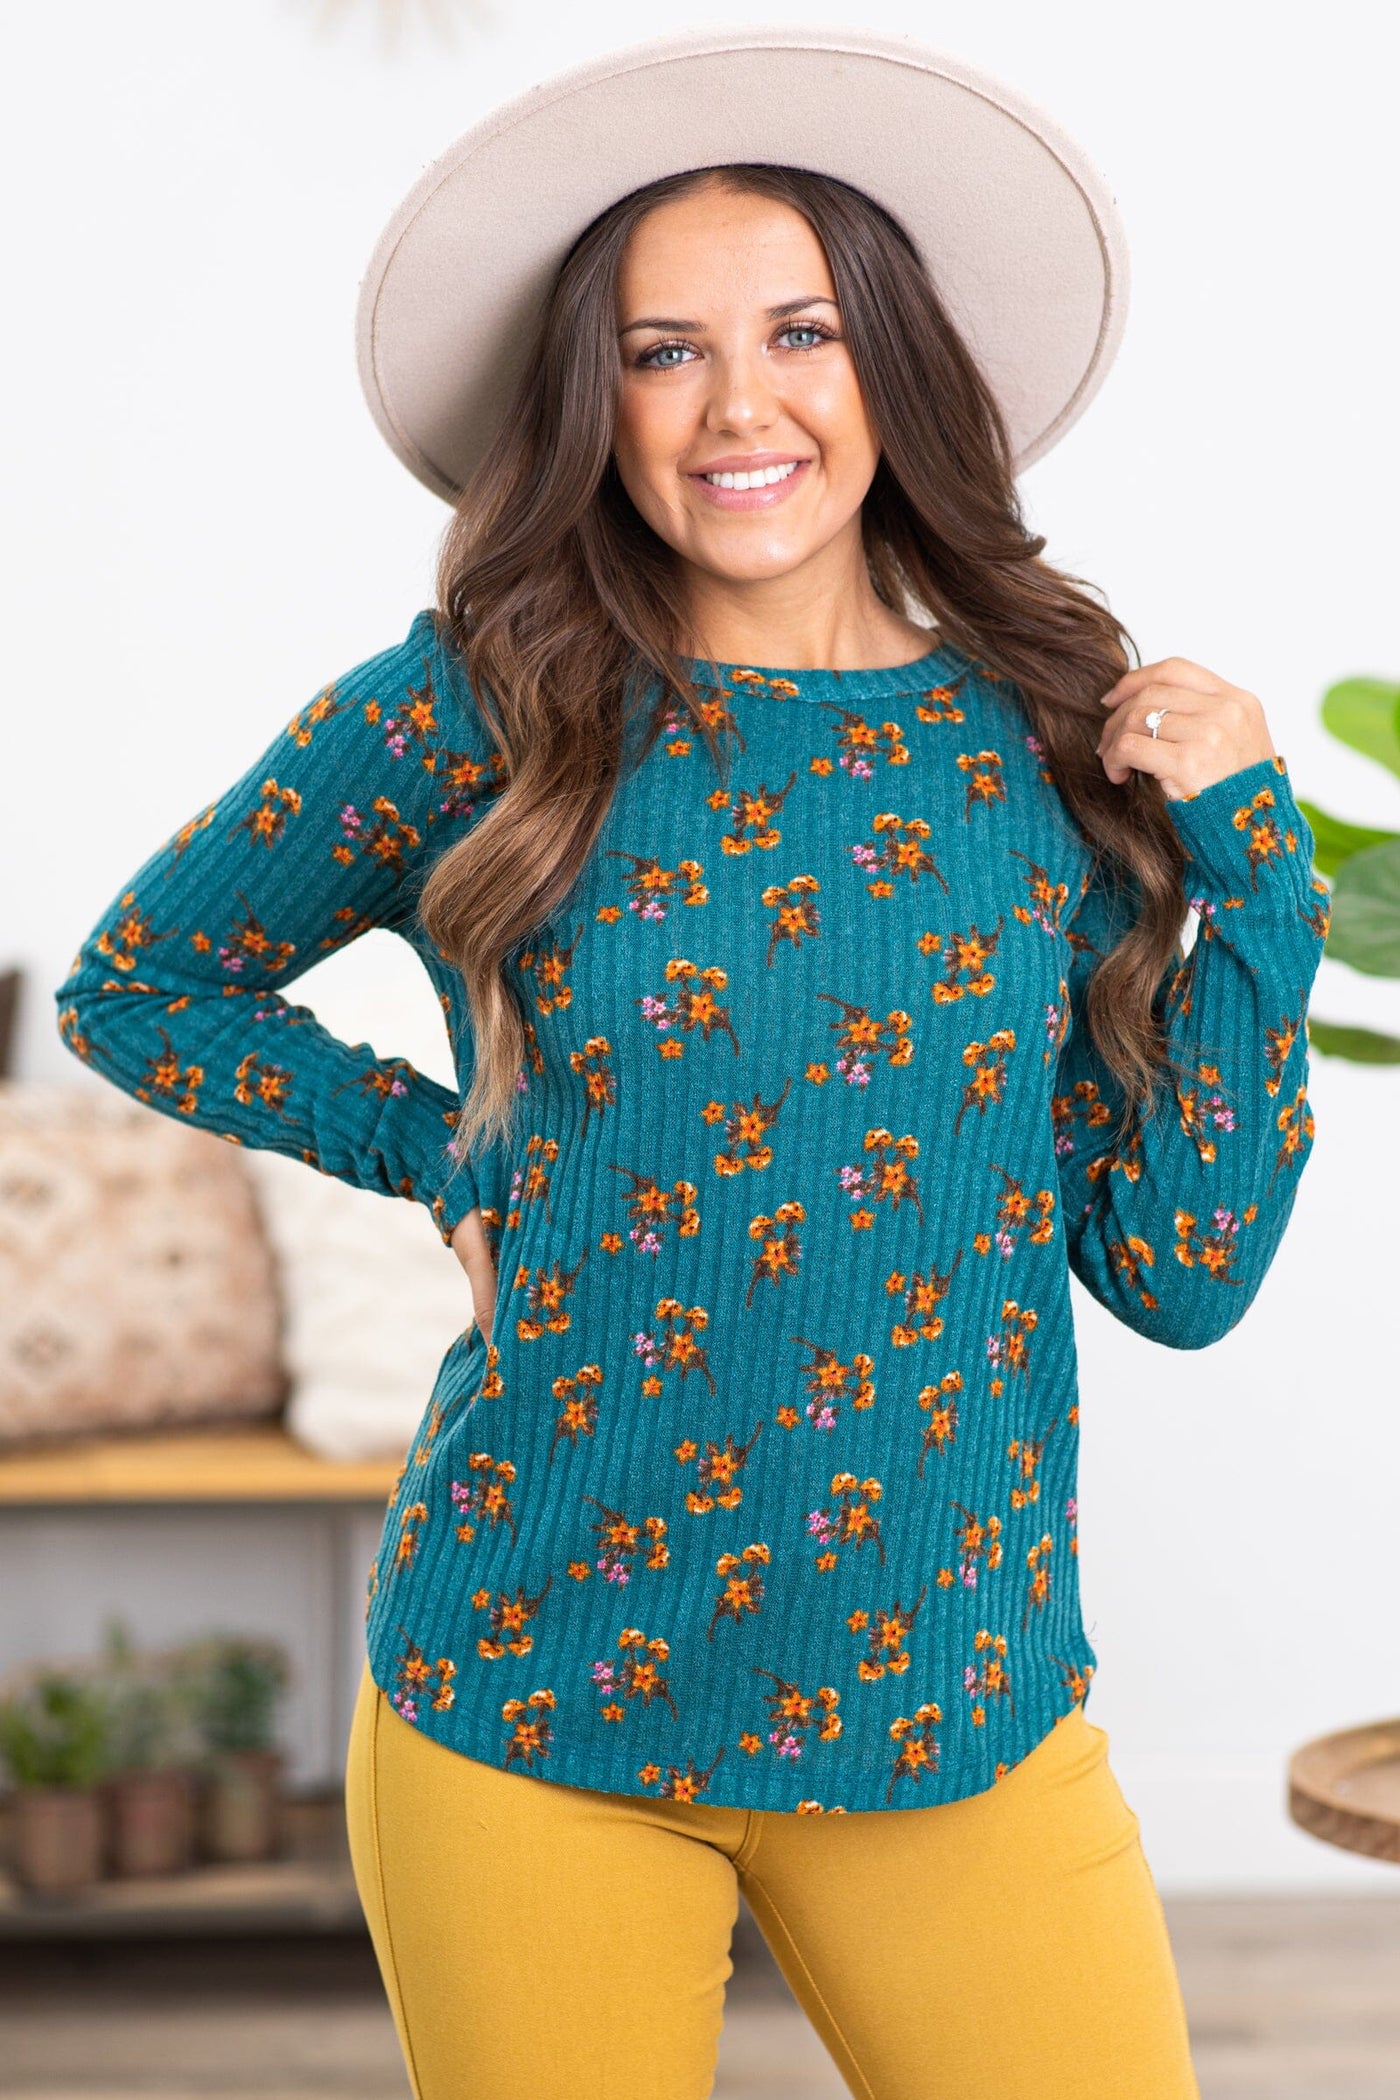 Teal and Mustard Floral Print Ribbed Top - Filly Flair